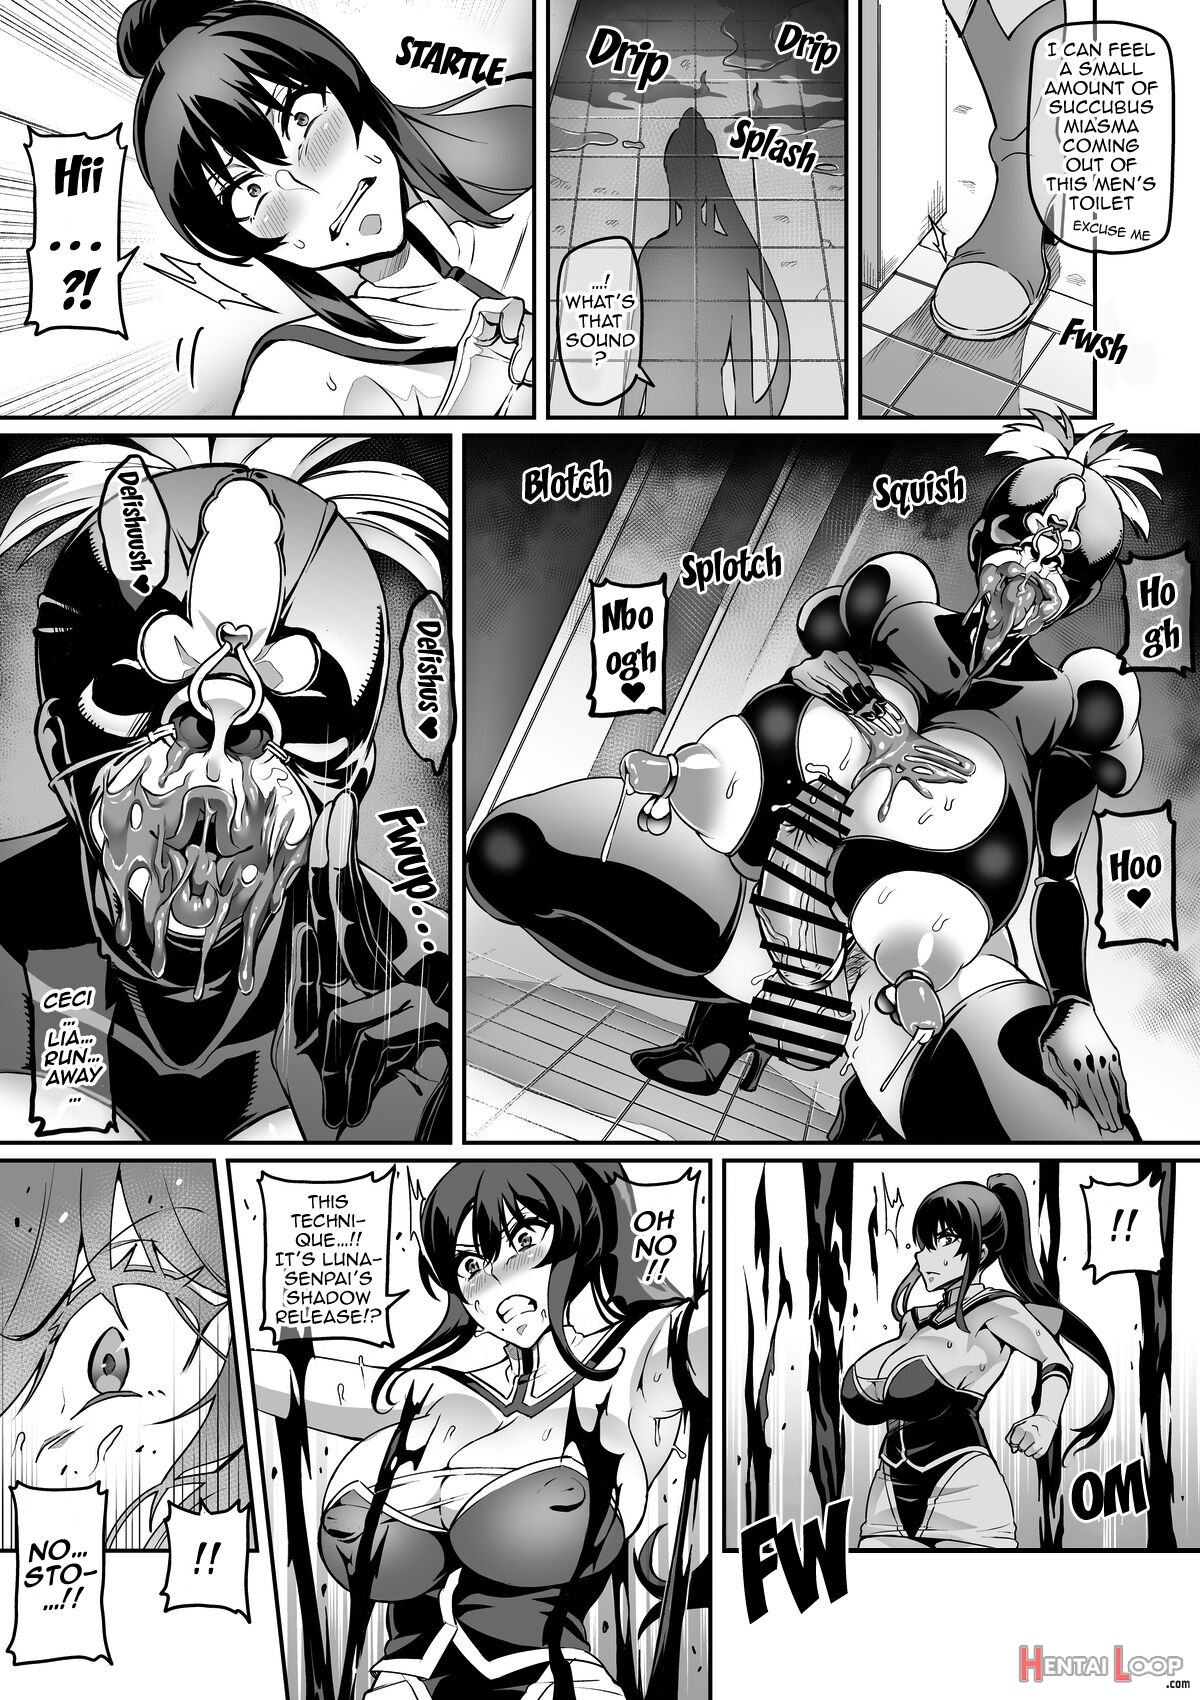 Demon Slaying Battle Princess Cecilia If Lunaria And The Trap Of The Perverted Royal Family ~ugly Remodeling Edition~ page 8